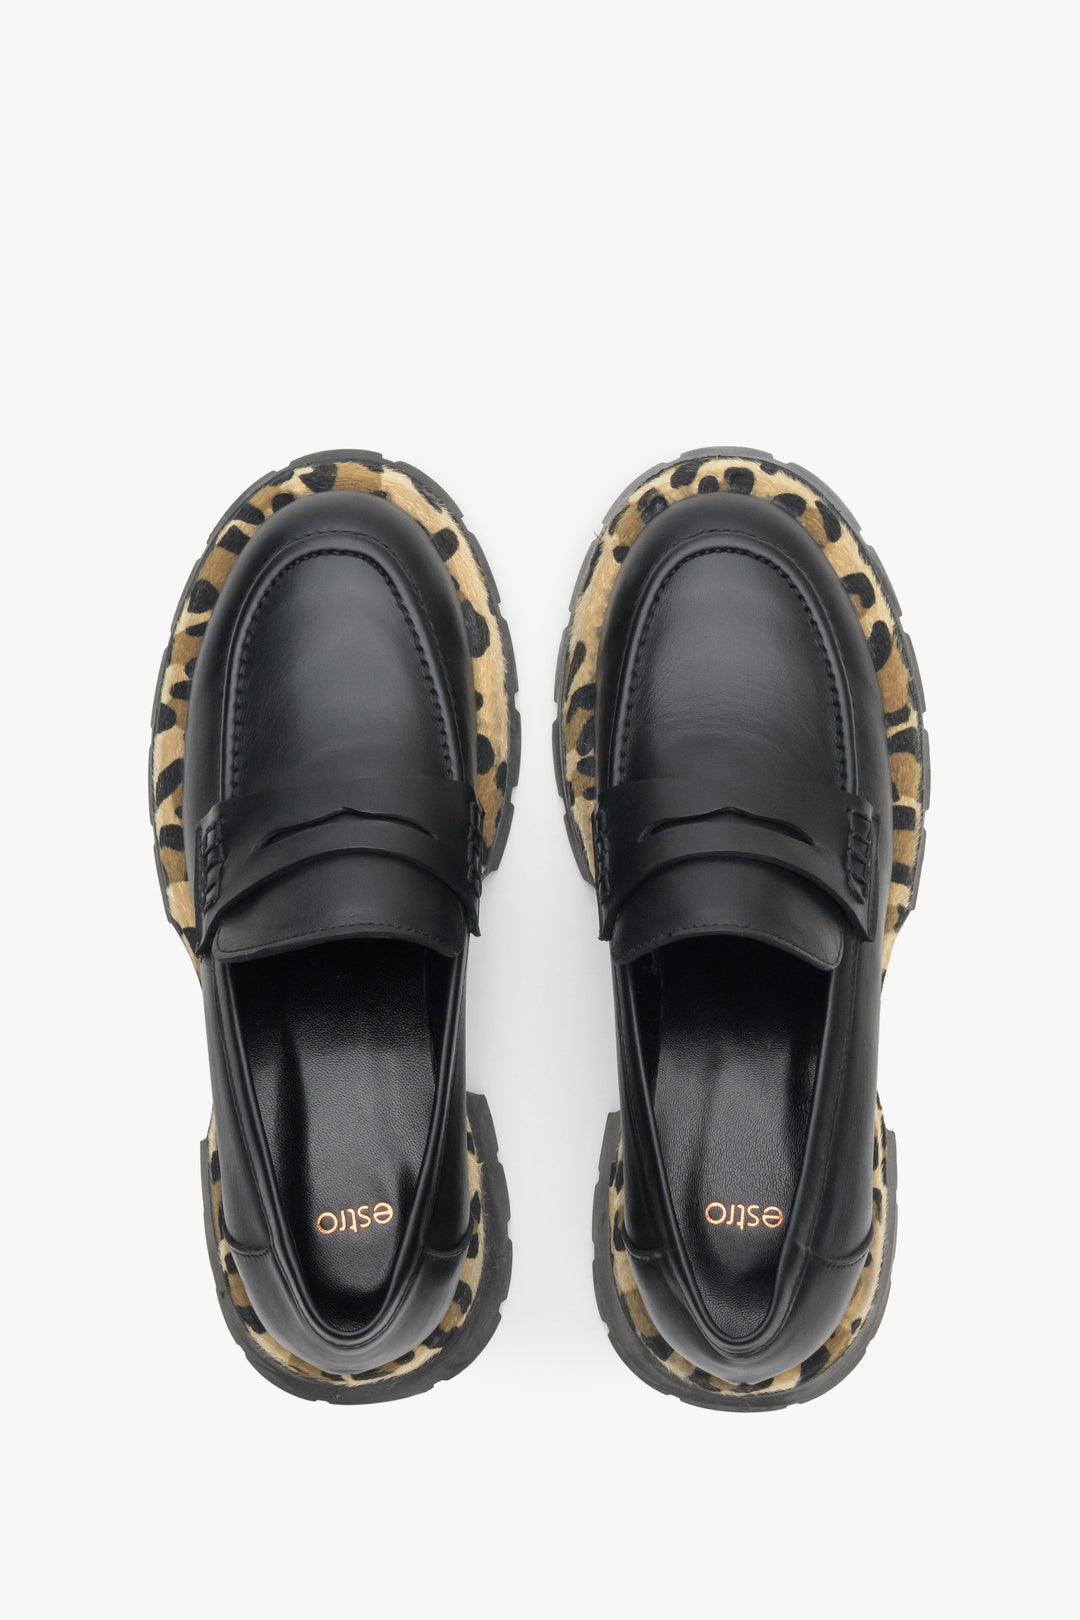 Women's black  moccasins with an animal print pattern by Estro - top view presentation of the model.